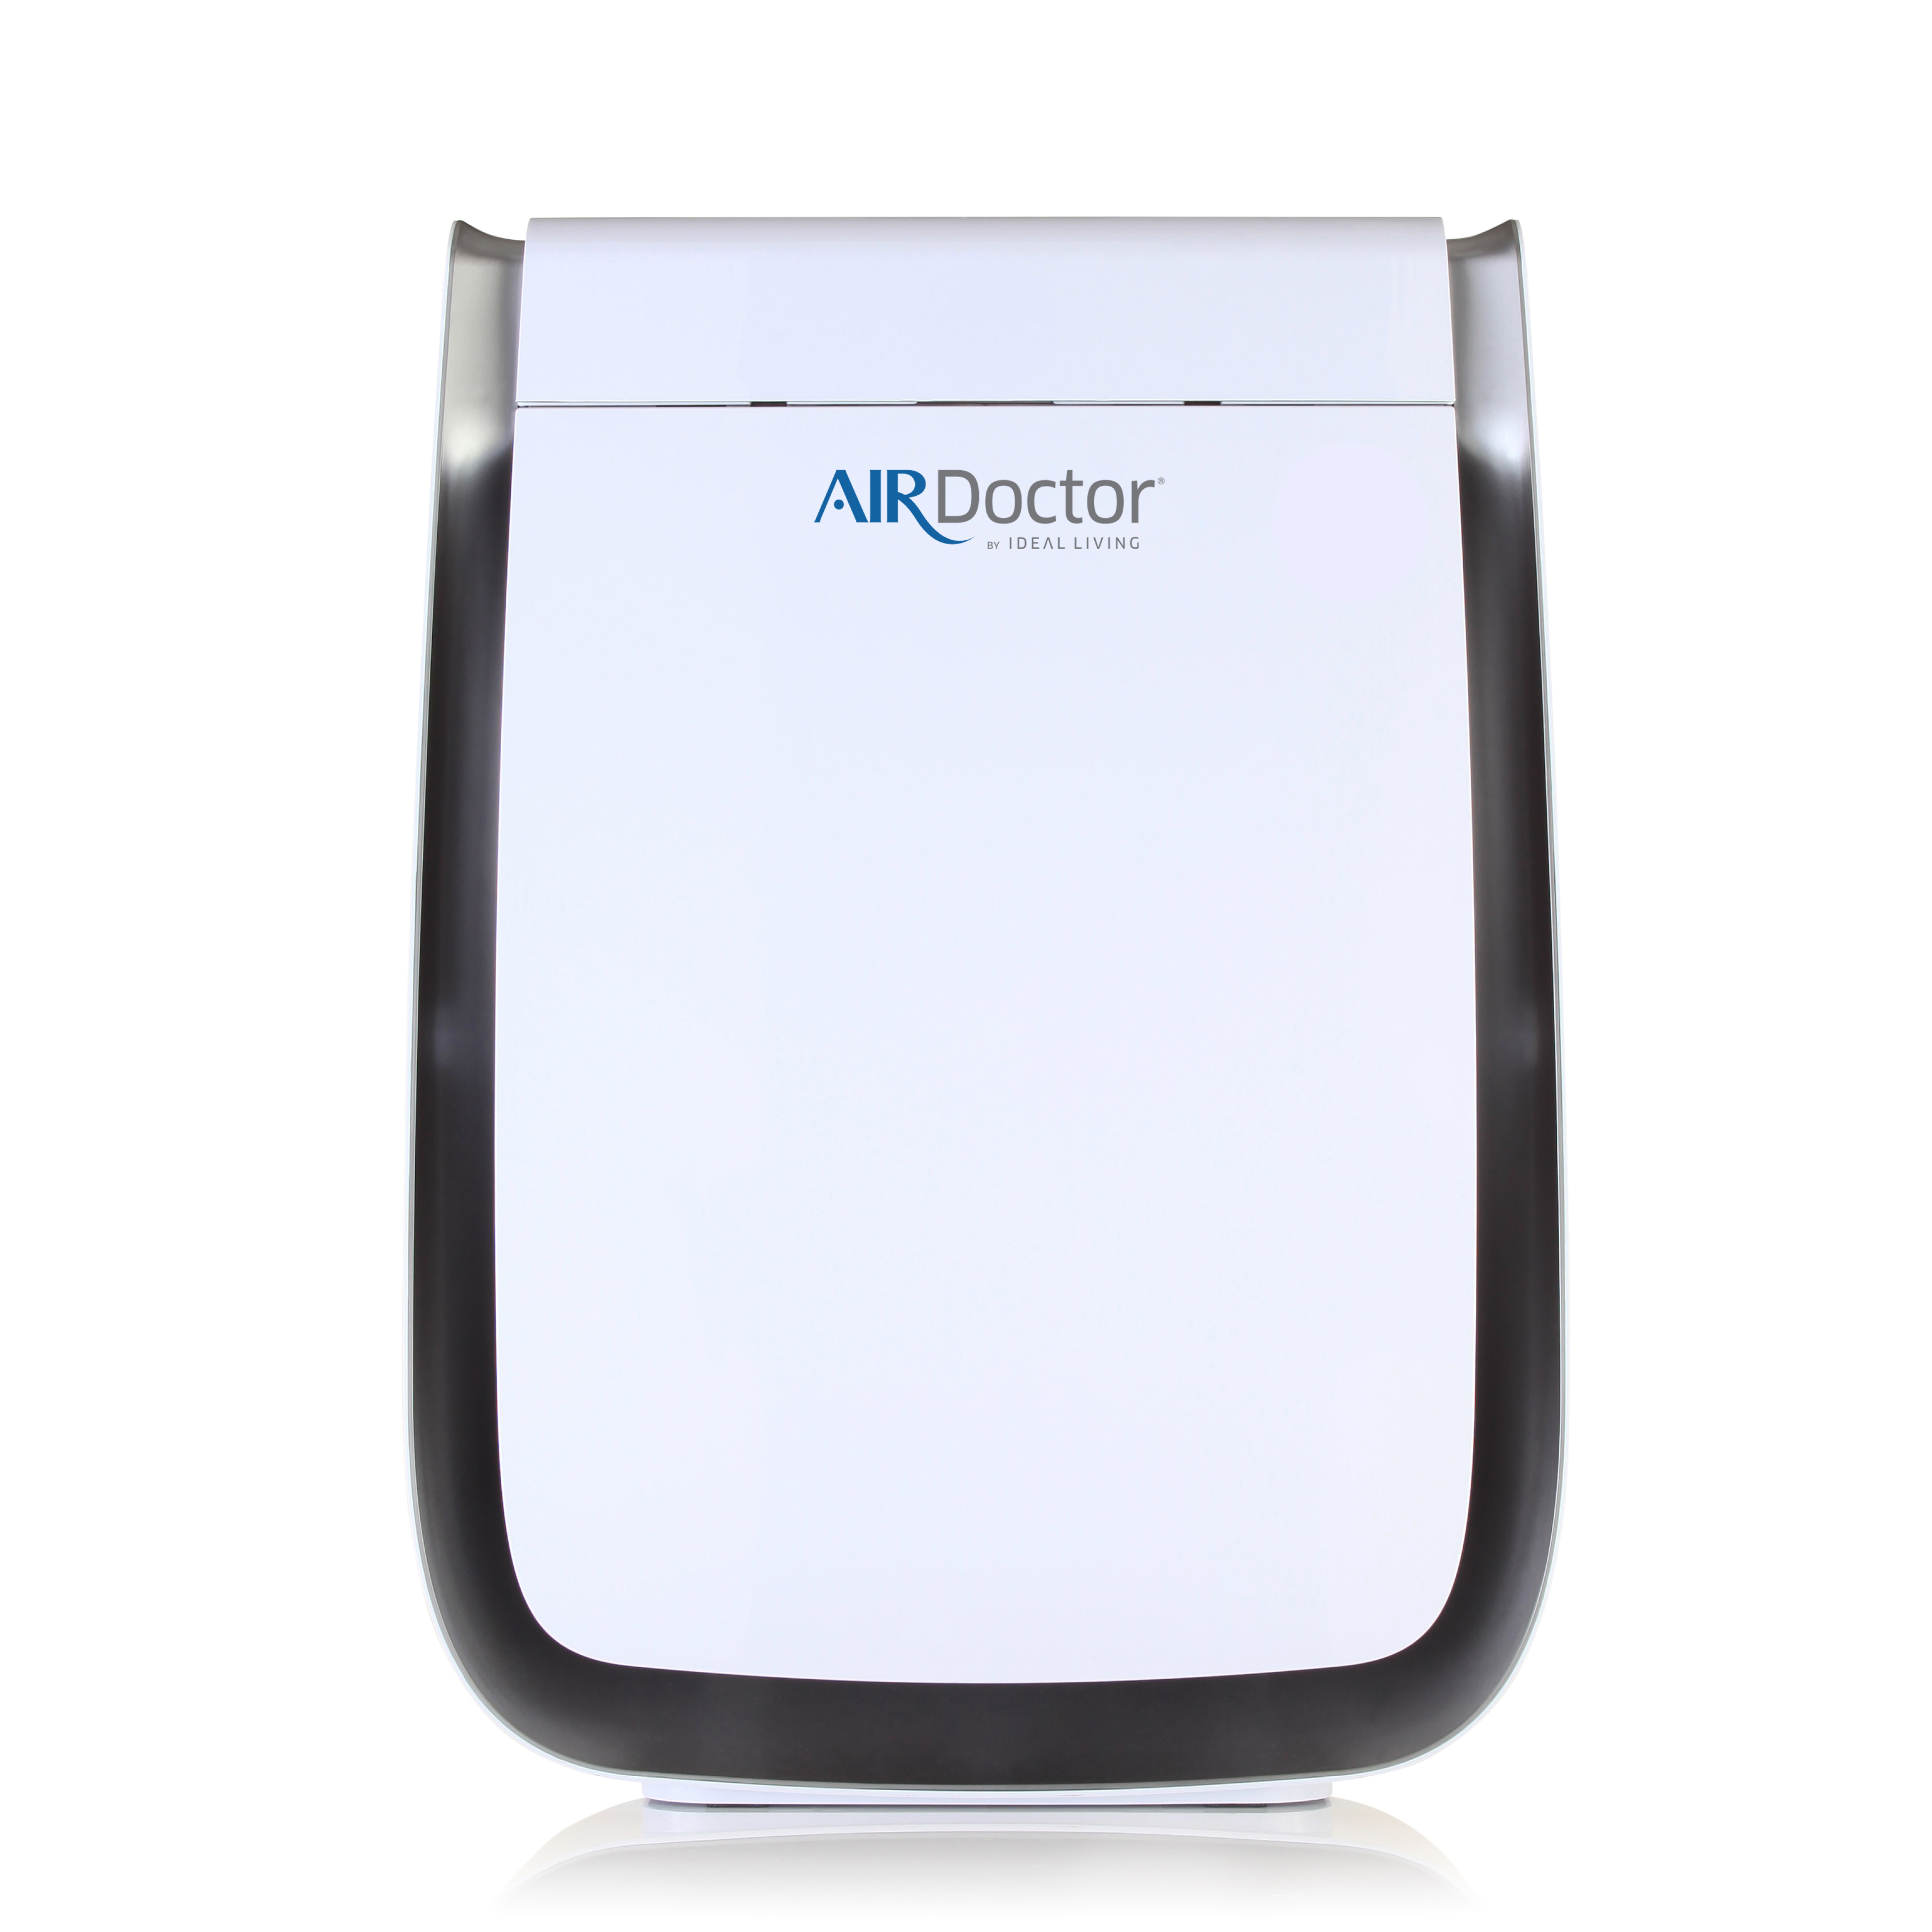 AIRDOCTOR AD3000 Air Purifiers for Home  Large Rooms Up to sq. ft per hr  with UltraHEPA, Carbon, VOC Filters Air Quality Sensor. Removes Particles  100x Smaller Than HEPA (AirDoctor 3000)